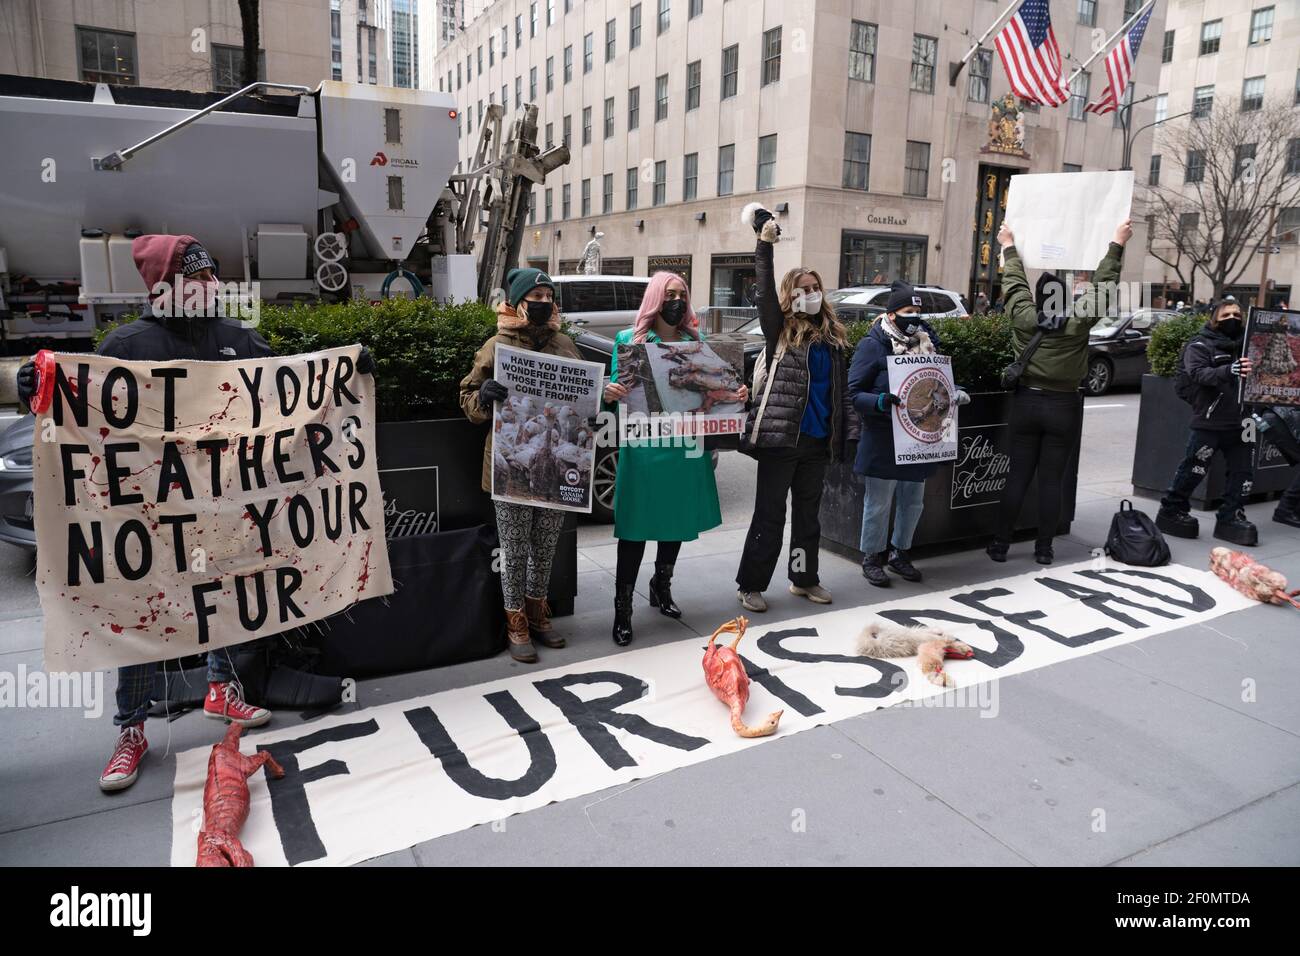 Activists hold placards during the demonstration.Animal rights activists  held a peaceful protest in front of Saks Fifth Avenue. Protest against the Canada  goose brand specifically, which this retailer sells. Protesters called on